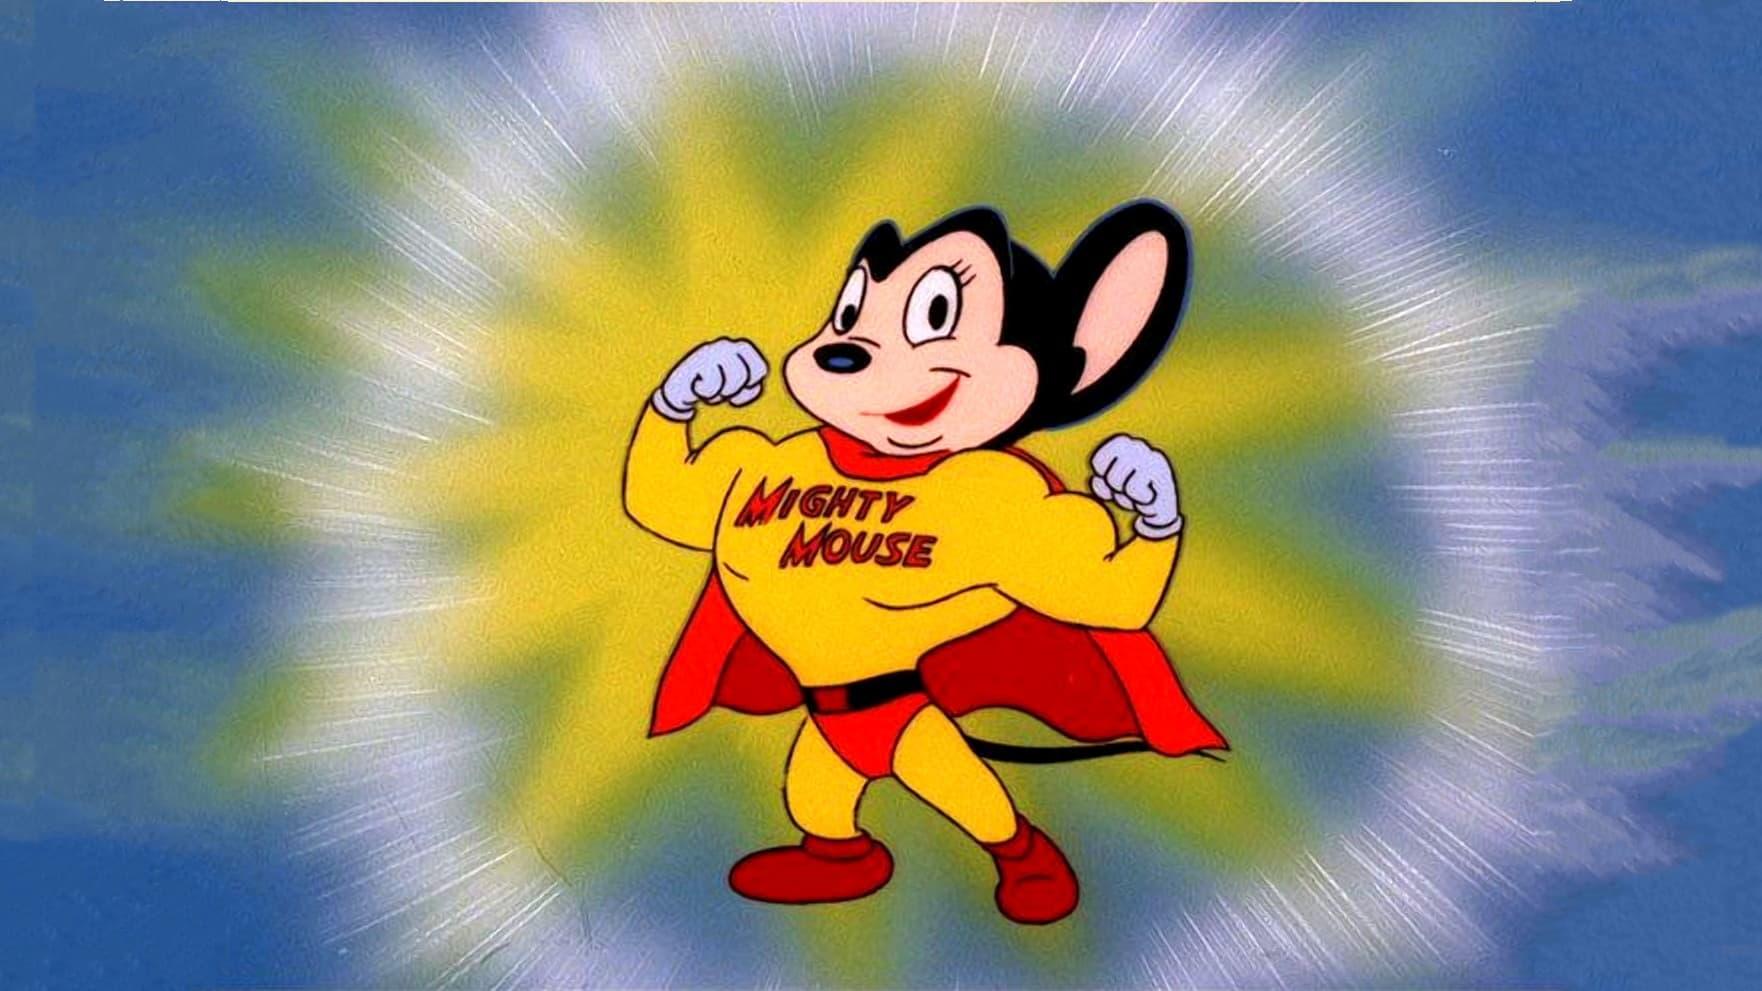 Mighty Mouse and the Wolf backdrop